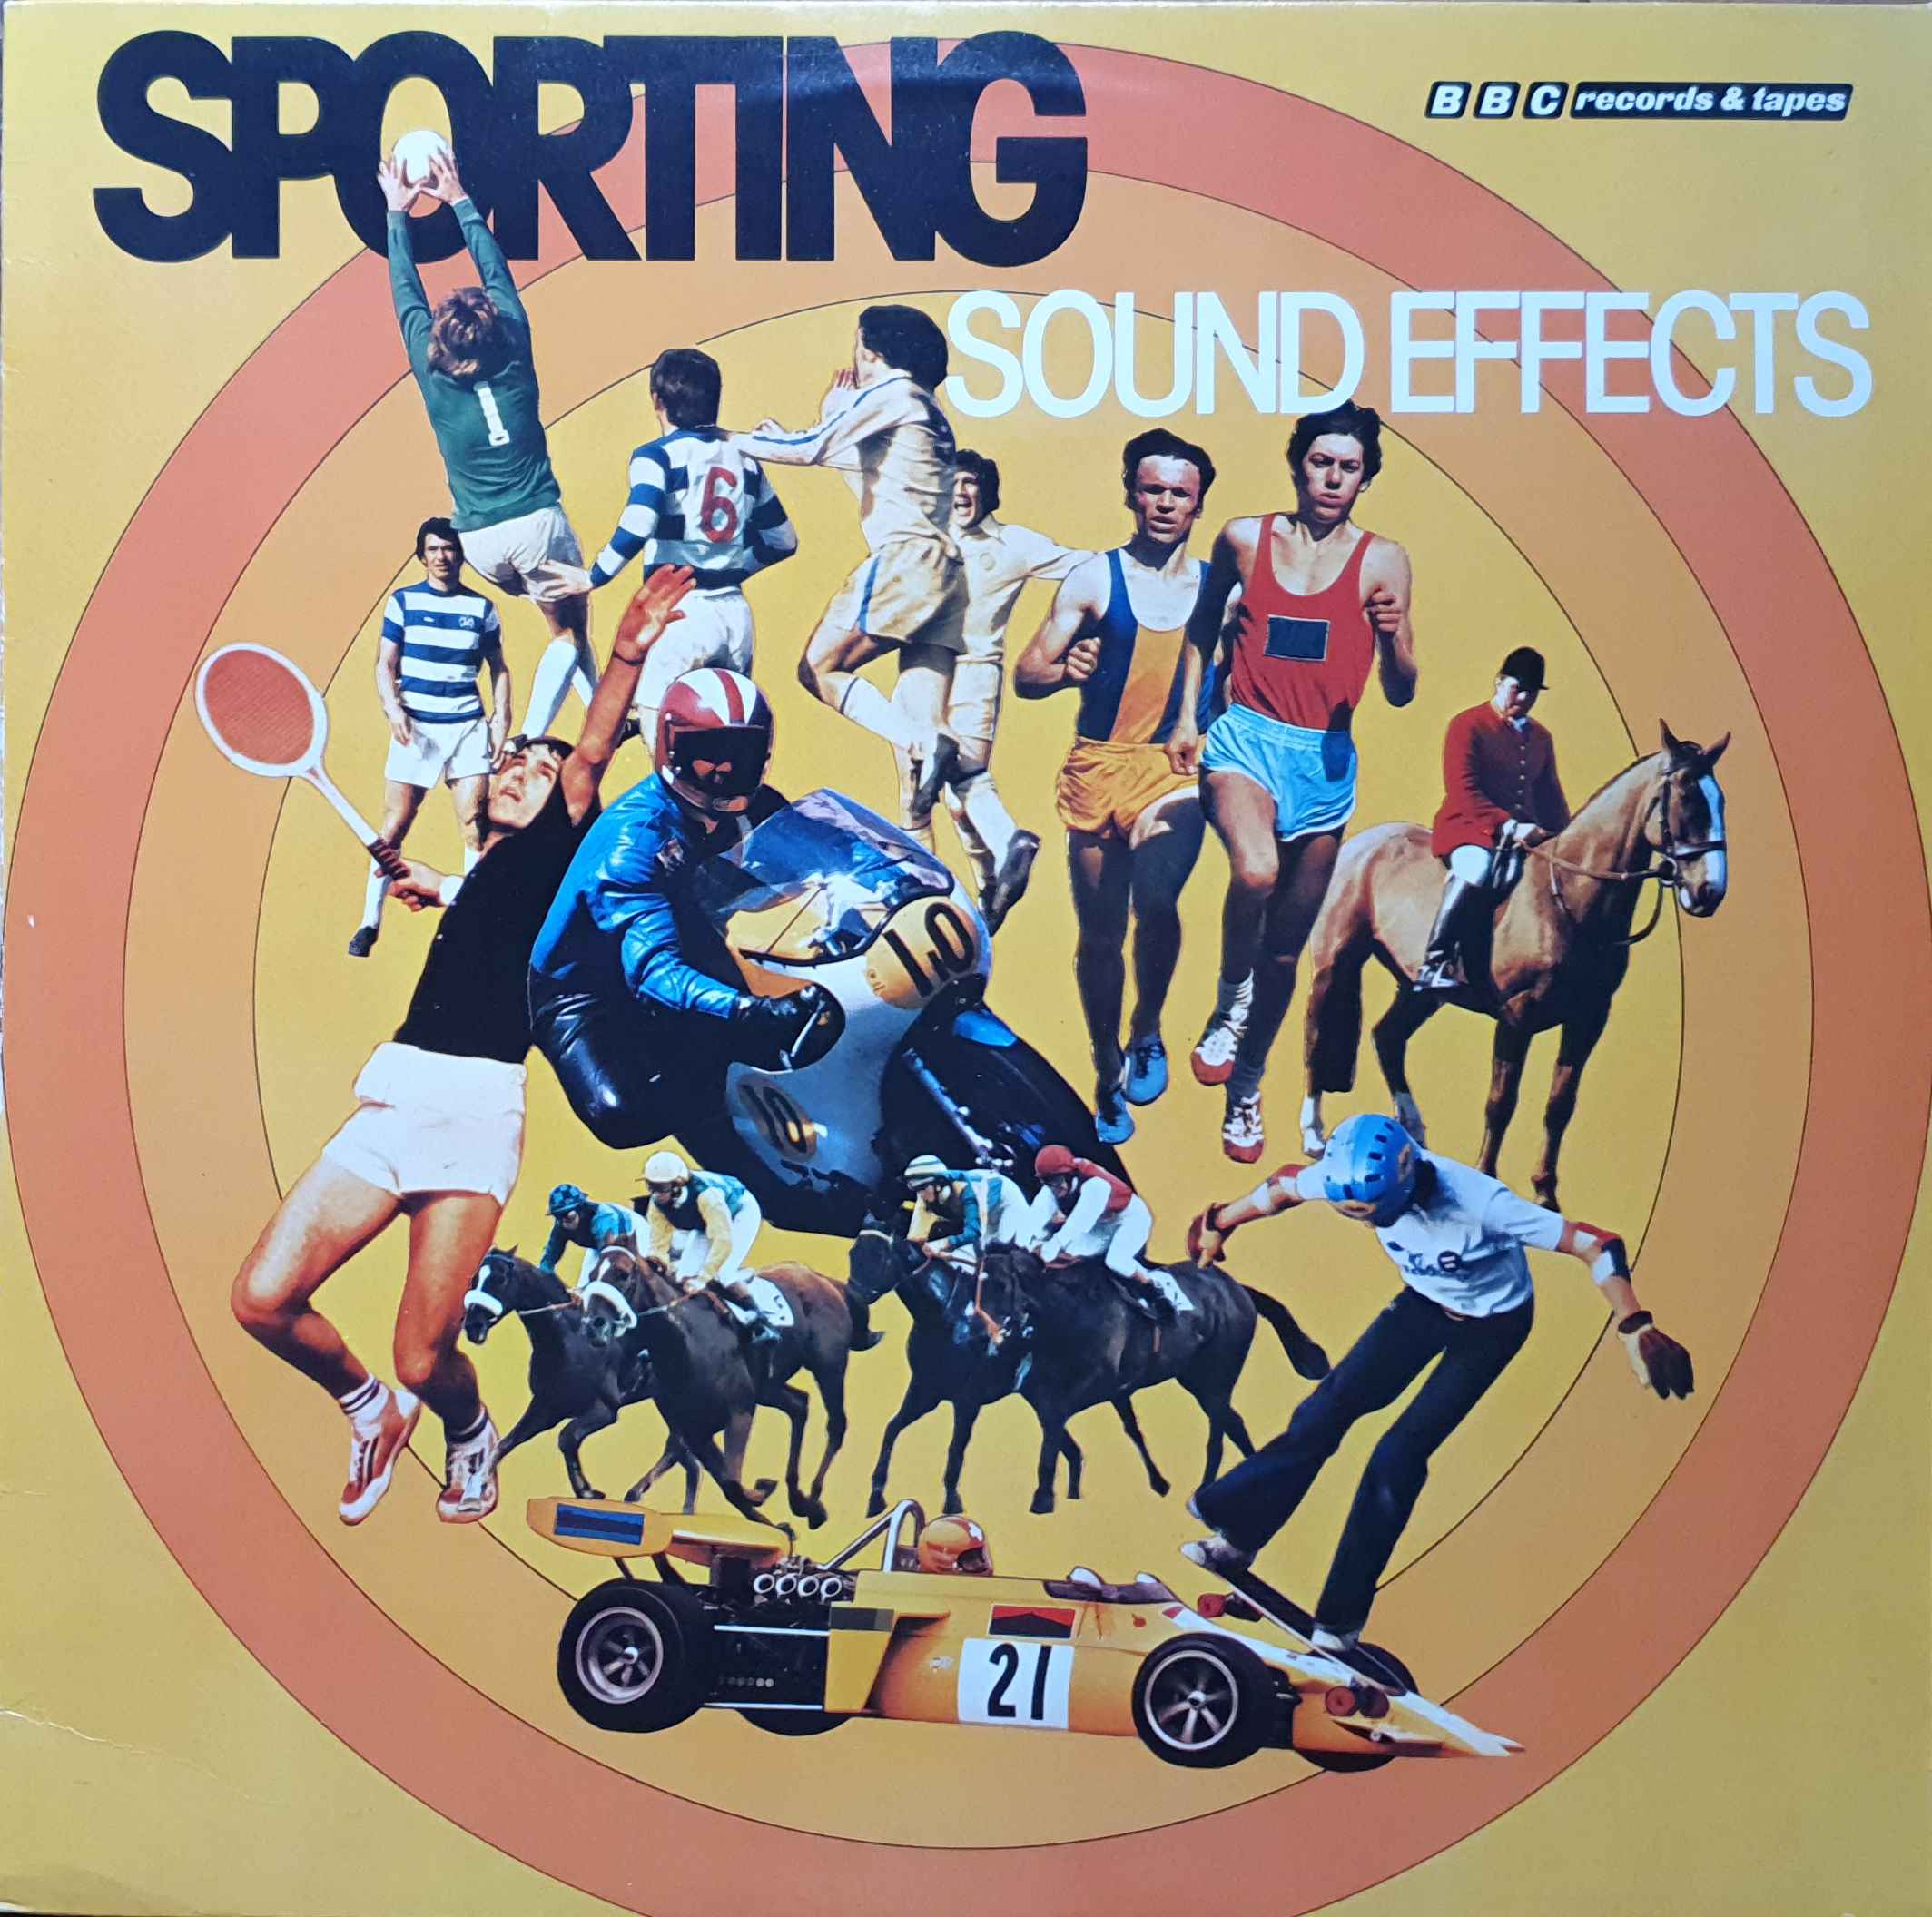 Picture of INT 128.003 Sporting Sound Effects (German import) by artist Various from the BBC albums - Records and Tapes library